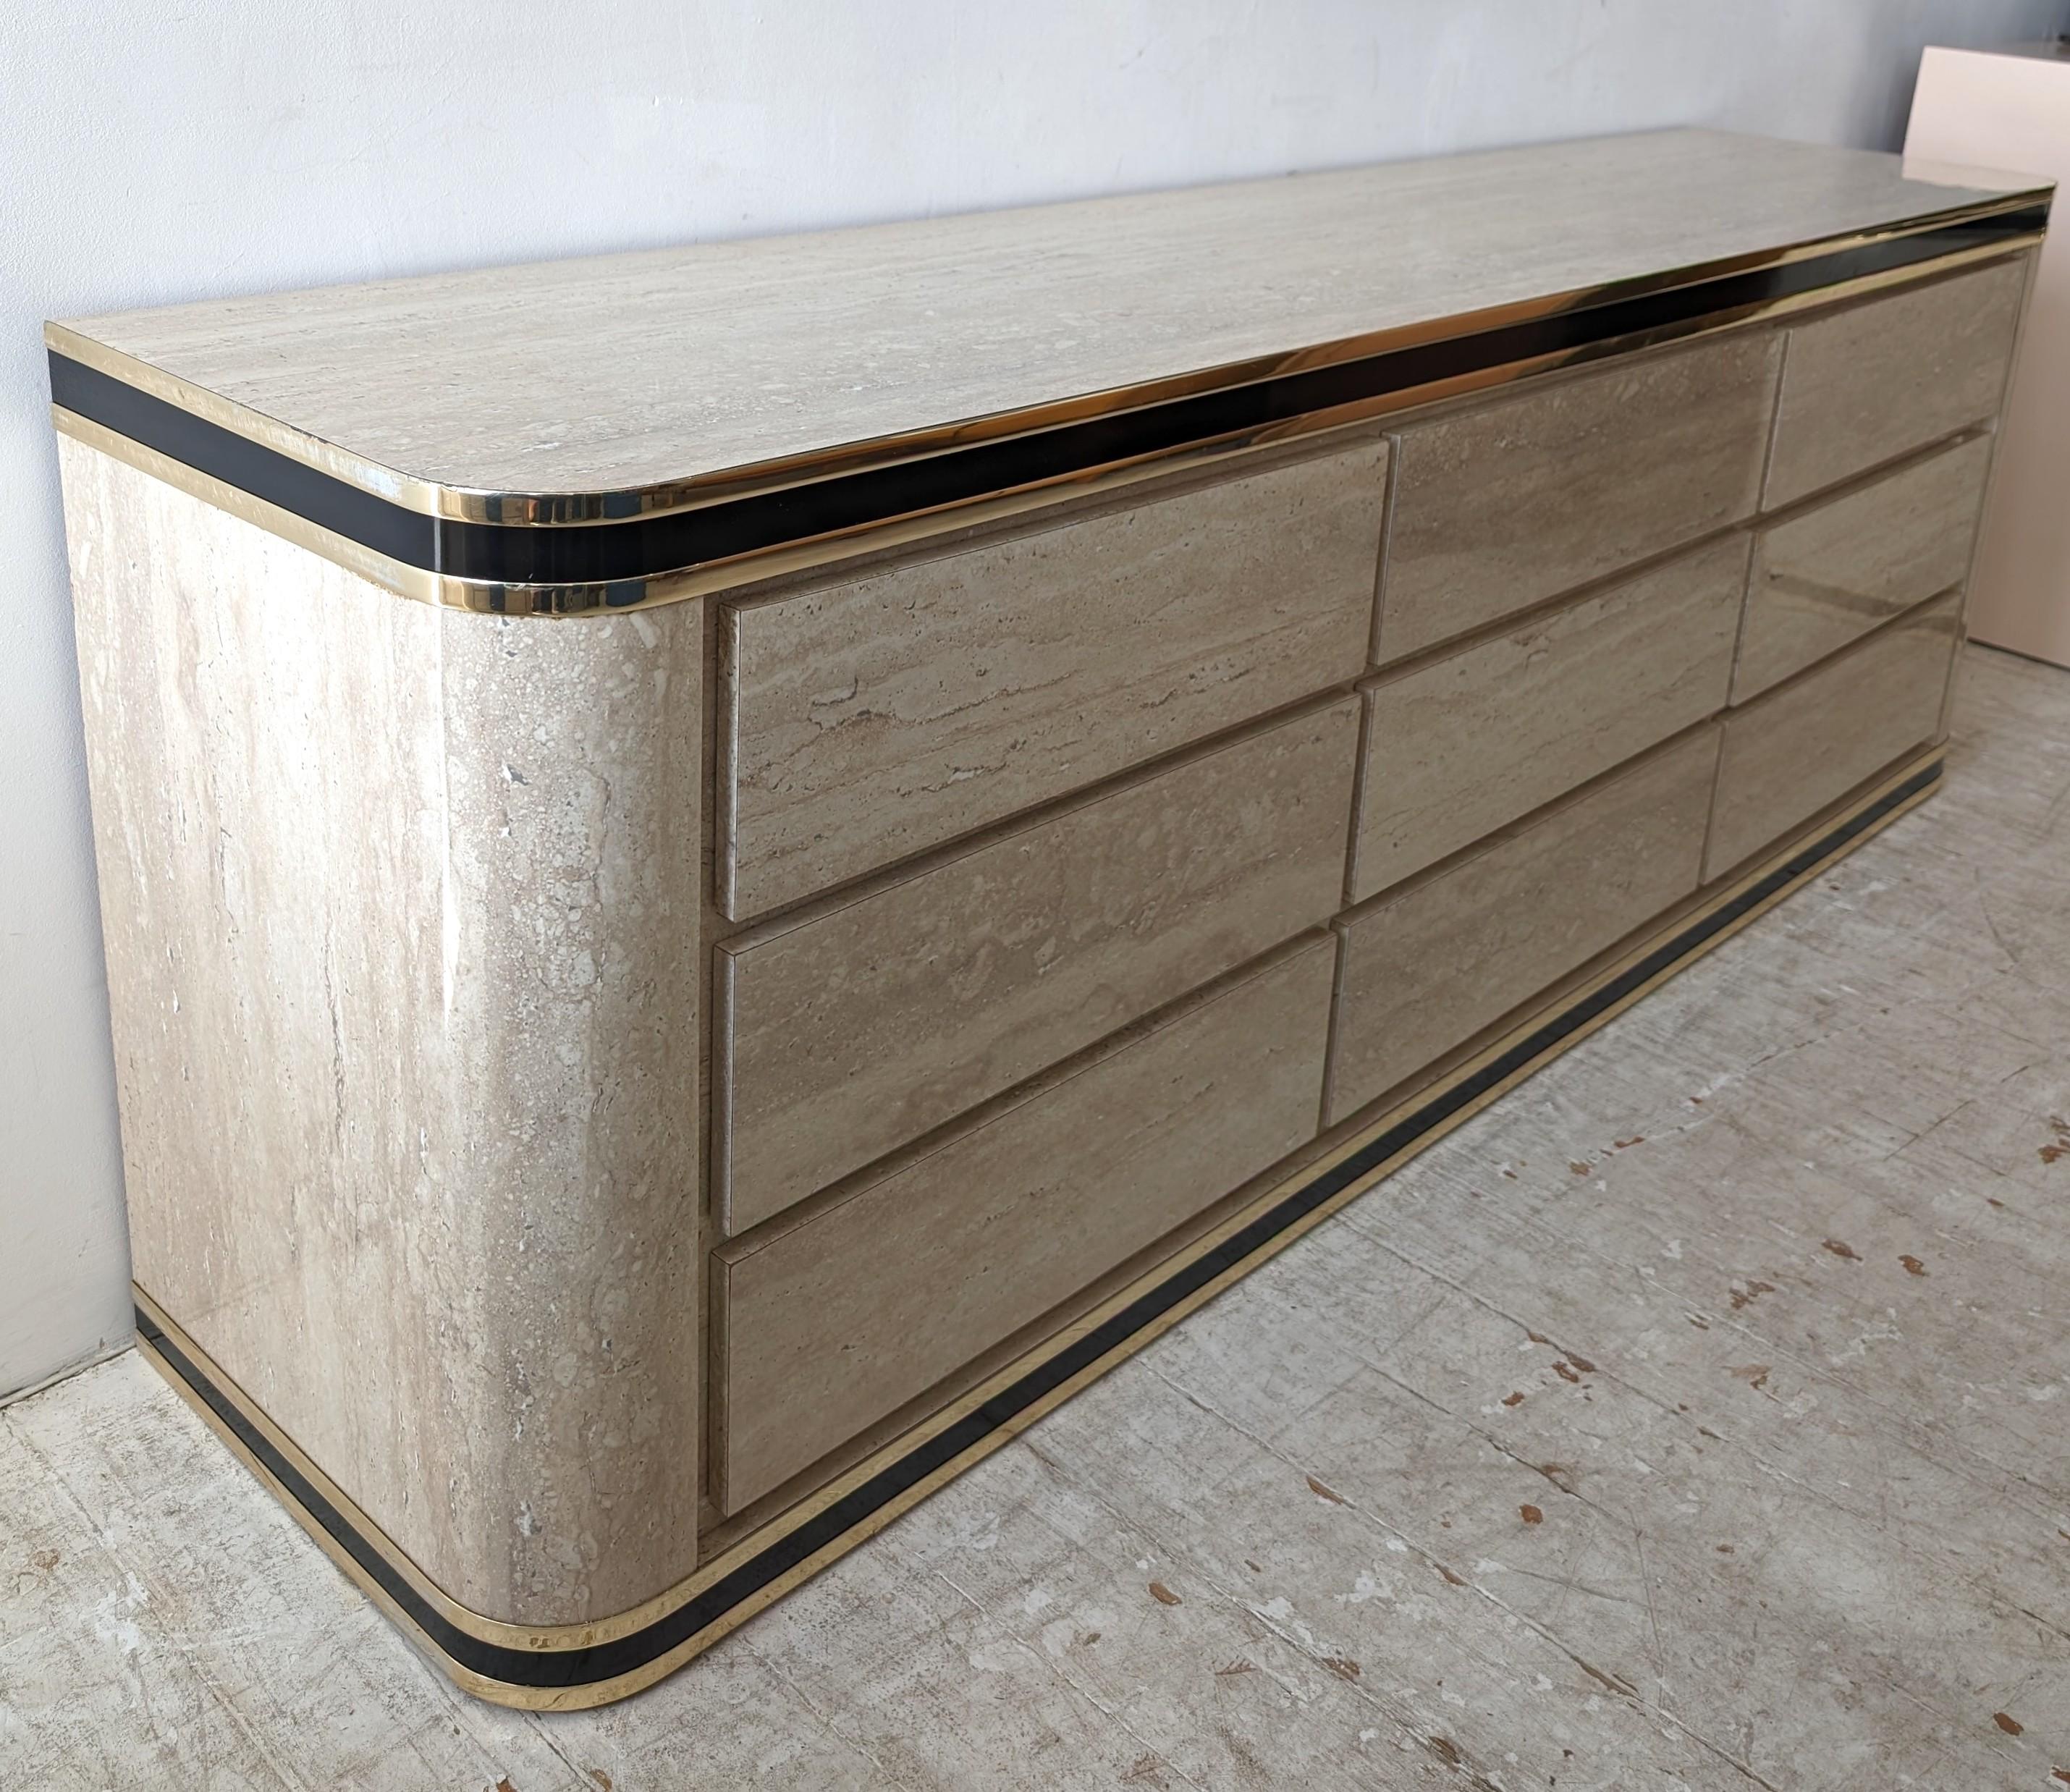 Post-Modern Vintage 1980s American faux travertine laminate sideboard / dresser with drawers